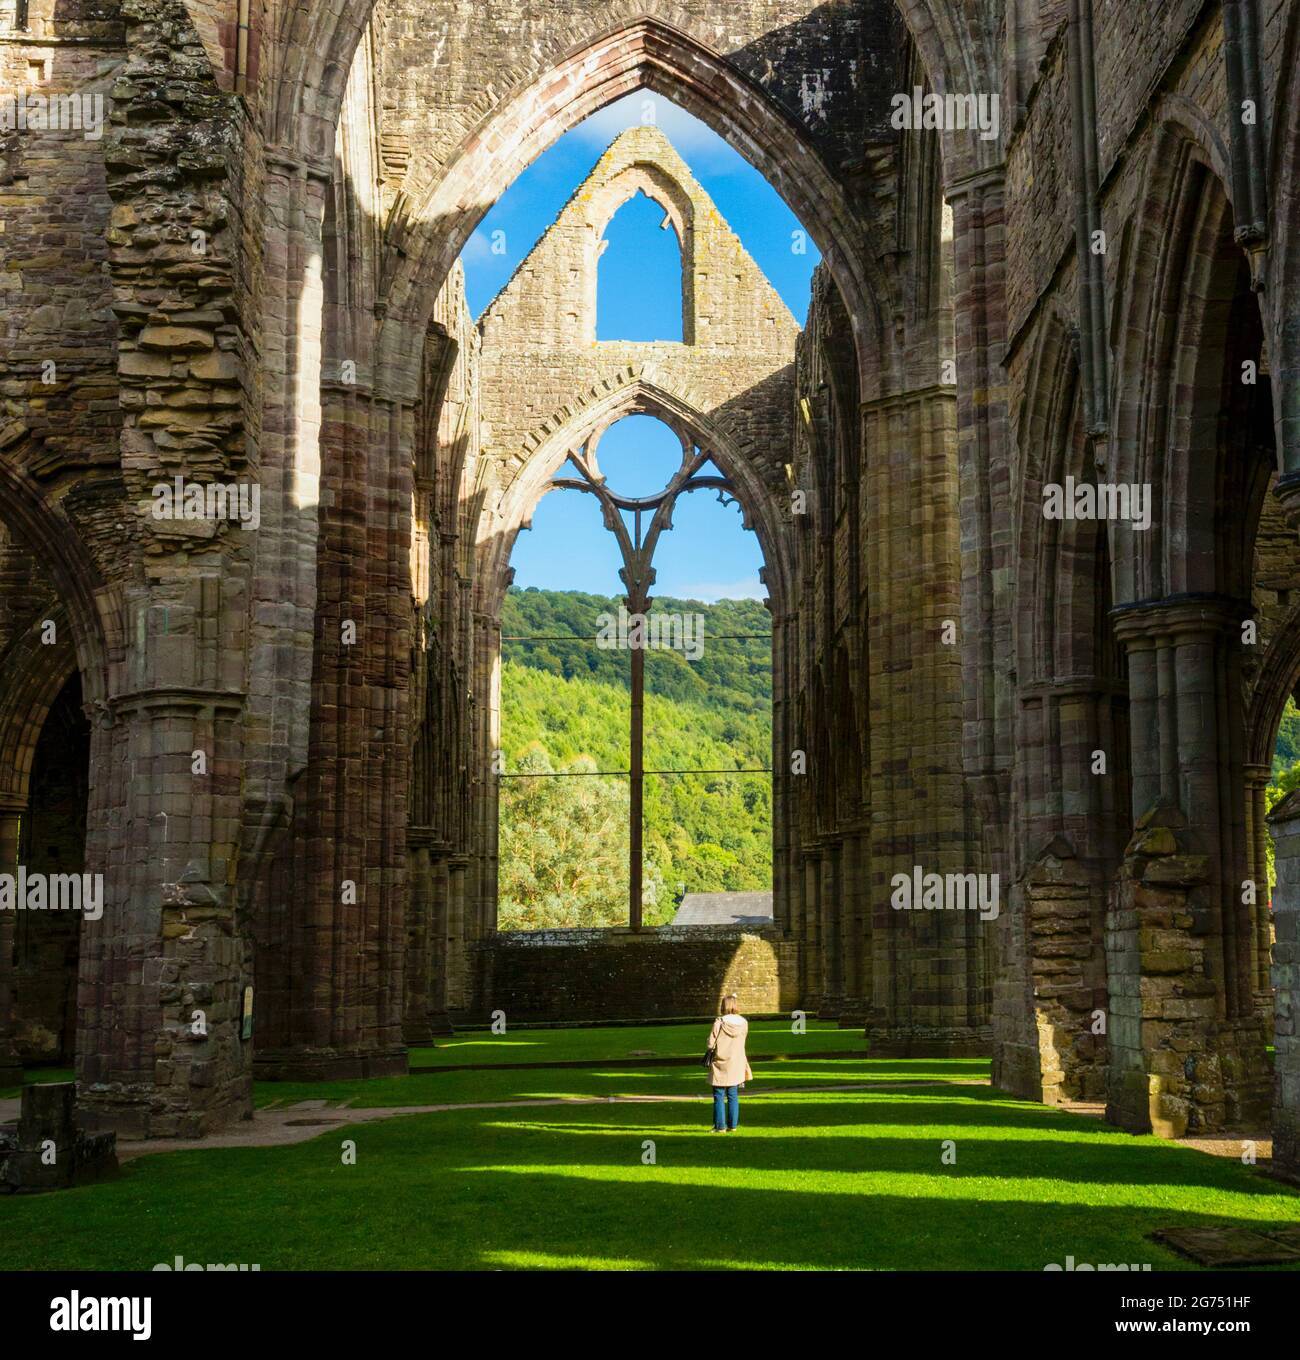 Tintern Abbey, Monmouthshire, Wales, United Kingdom.  The abbey was founded in 1131. Stock Photo